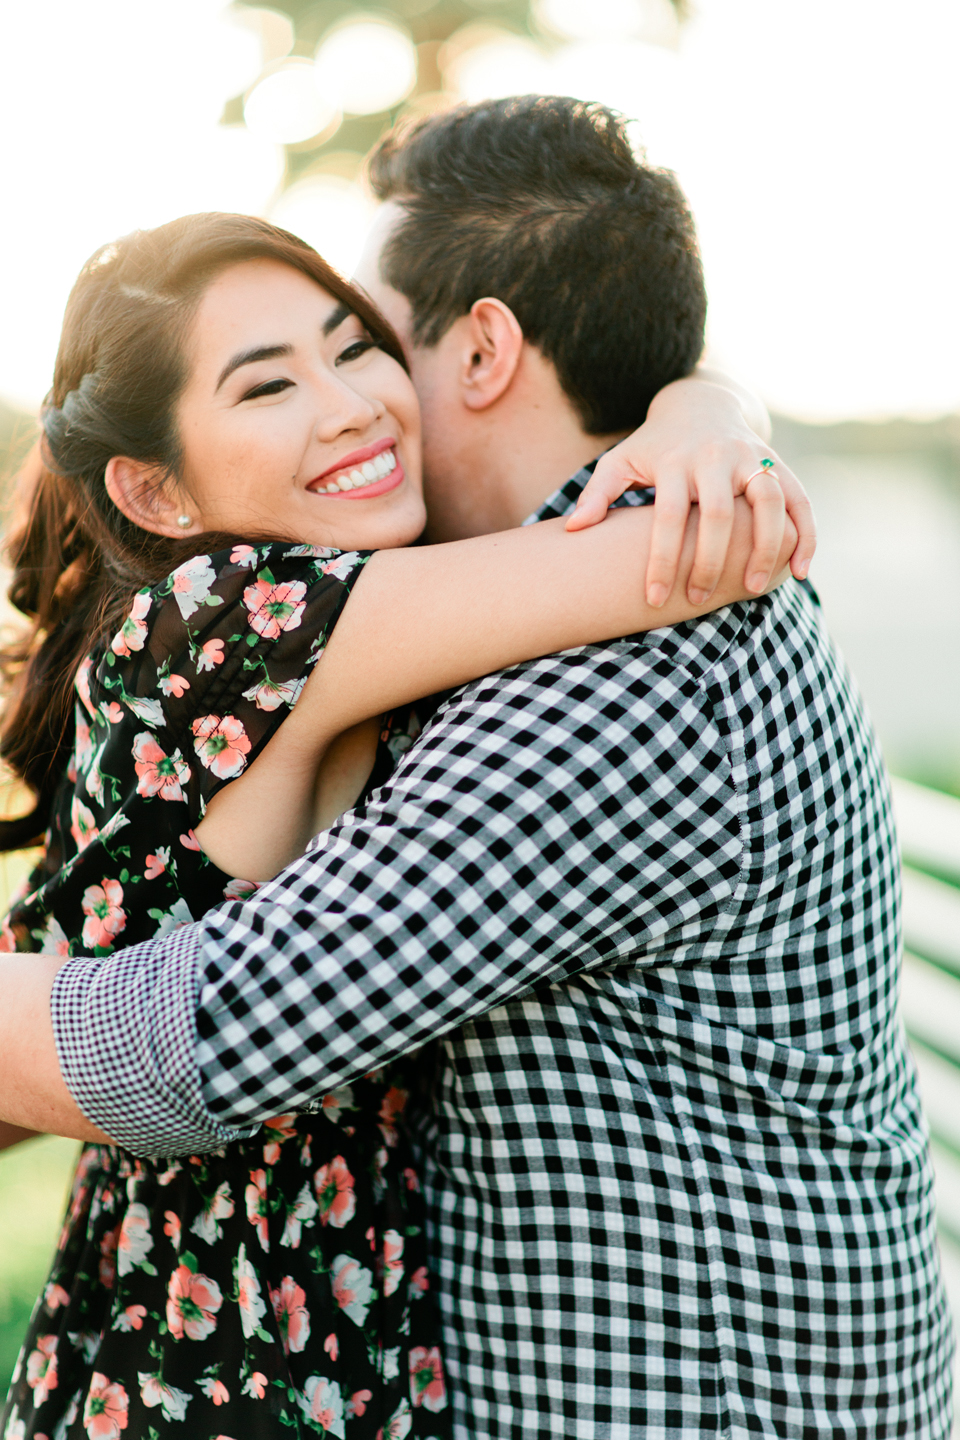 Image of a woman hugging her fiance at Curtis Hixon Waterfront Park in downtown Tampa.  This is an engagement portrait.